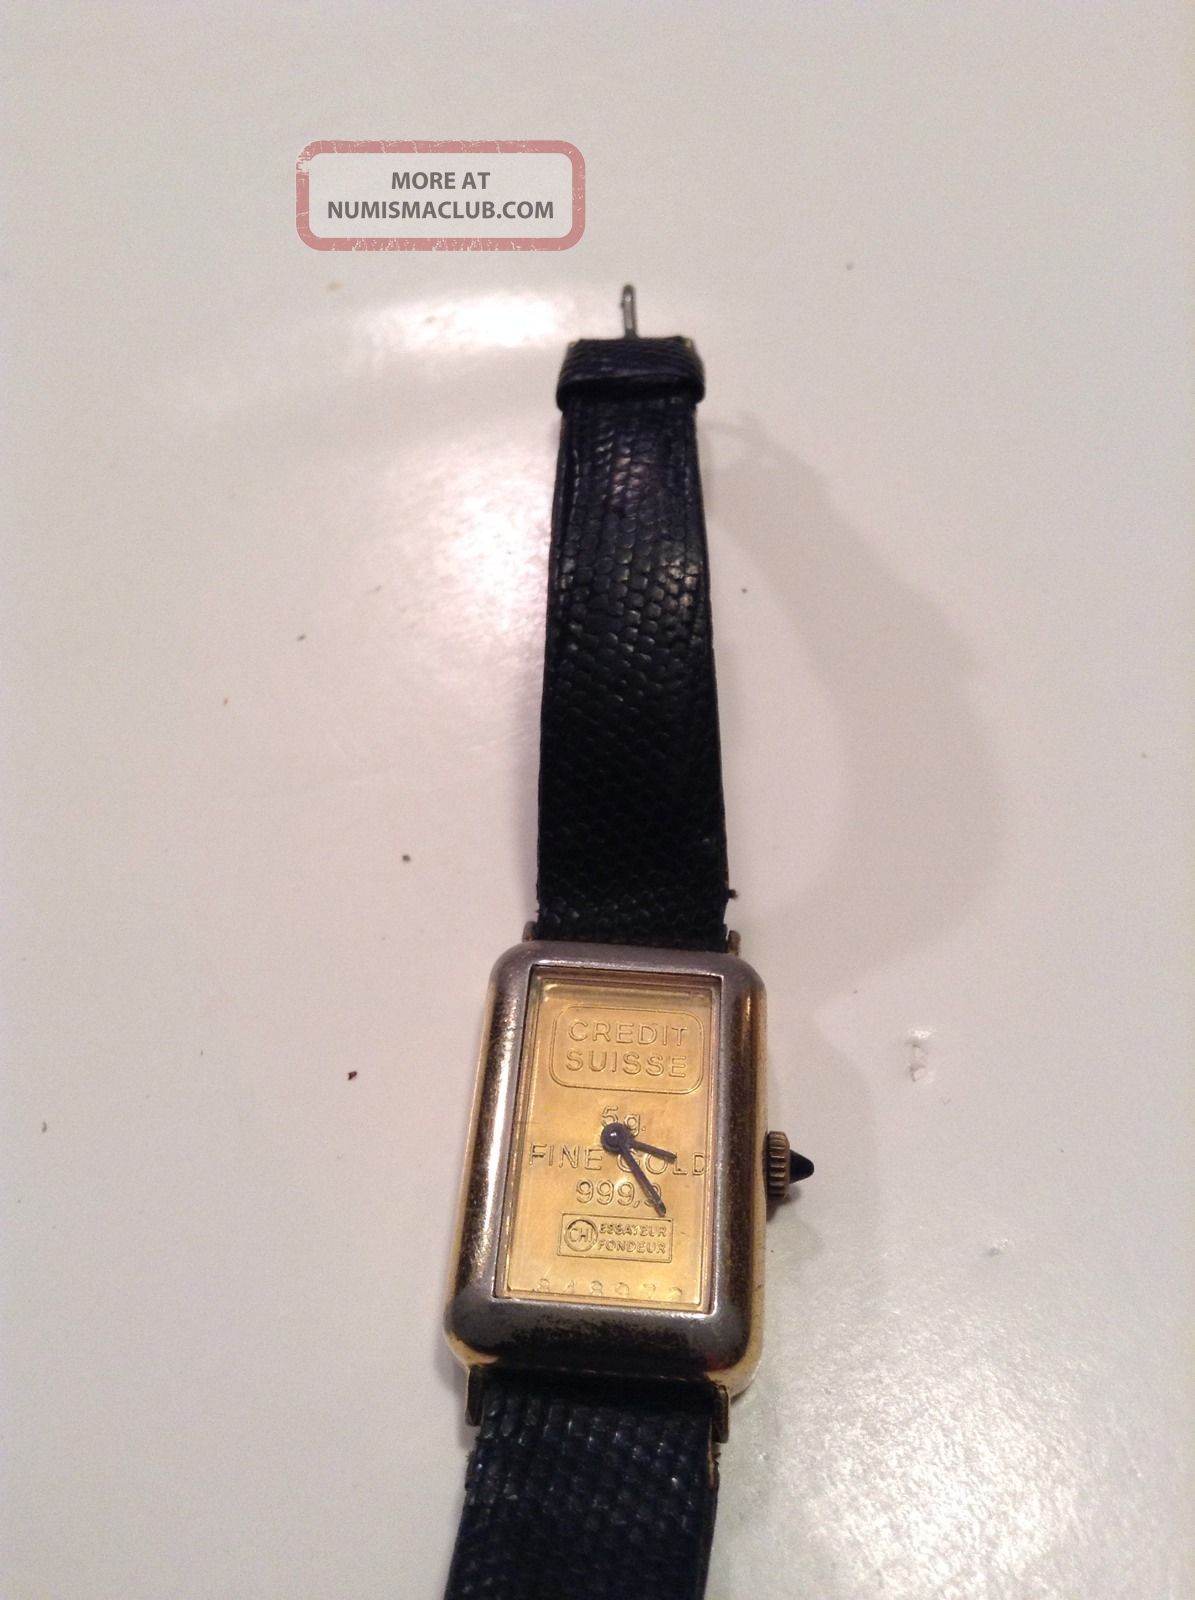 5 Gram Credit Suisse 99. 9 Gold Bar Watch Vintage With Lizard Band